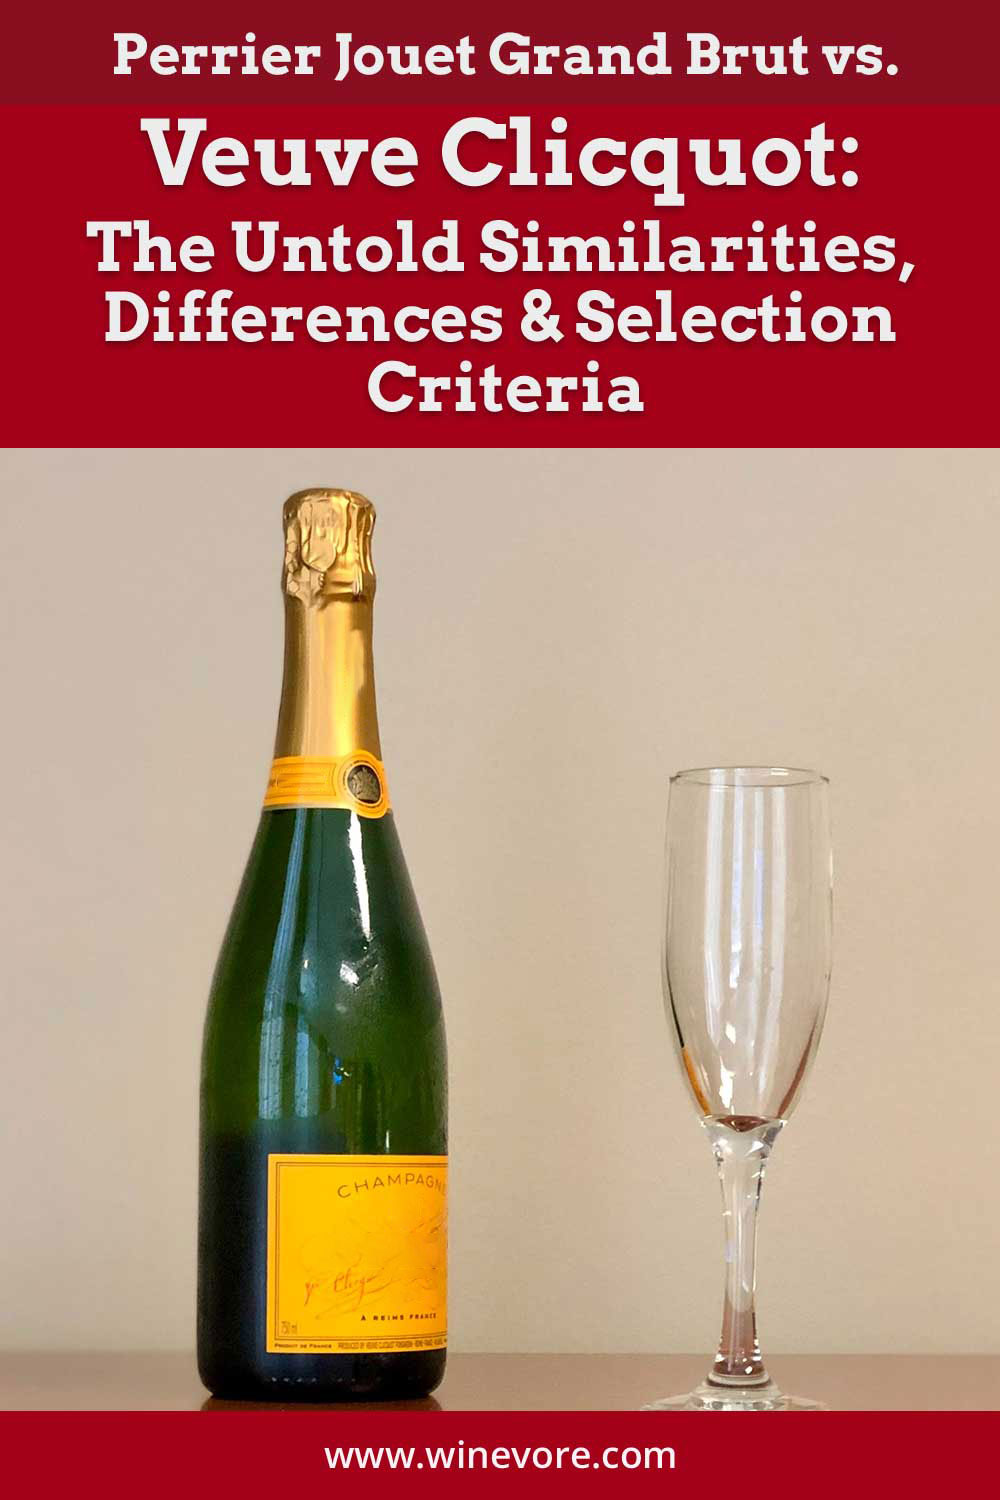 A sealed bottle with an empty wine glass - Perrier Jouet Grand Brut vs. Veuve Clicquot: Similarities, Differences & Selection Criteria